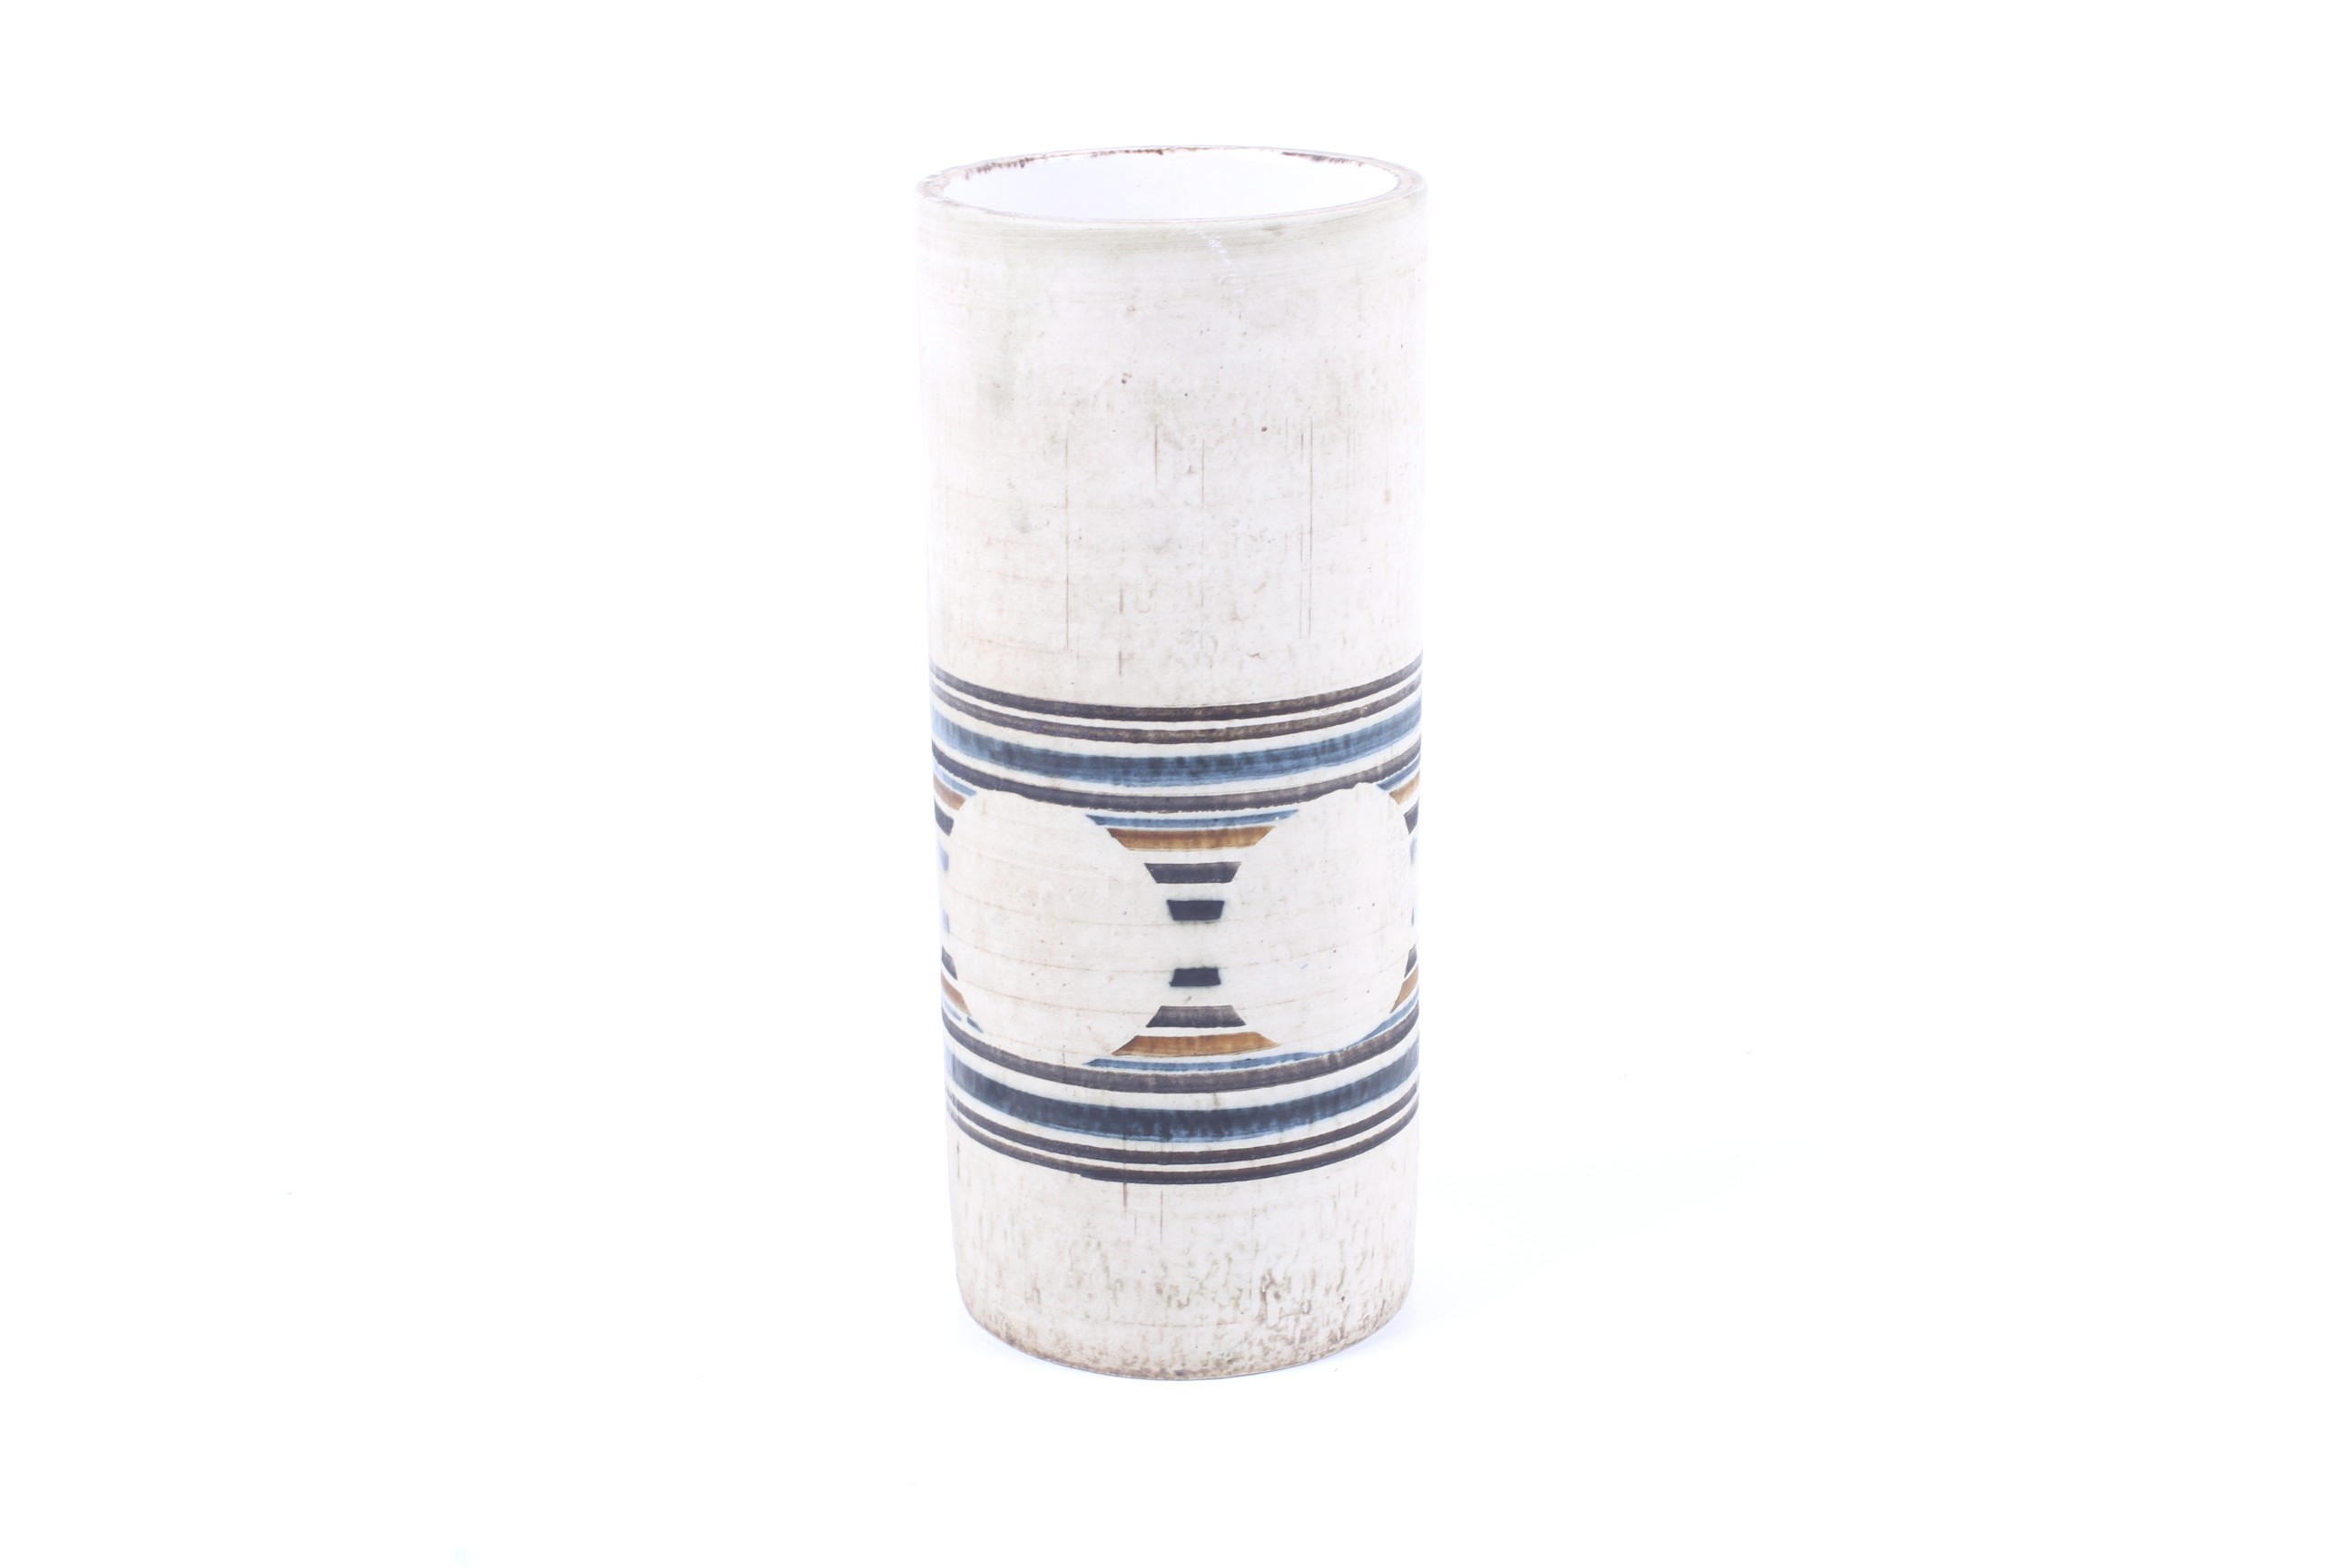 A circa 1960s Troika pottery cylinder vase. By Honor Curtis (HC) monogram to base, 'Troika, St.